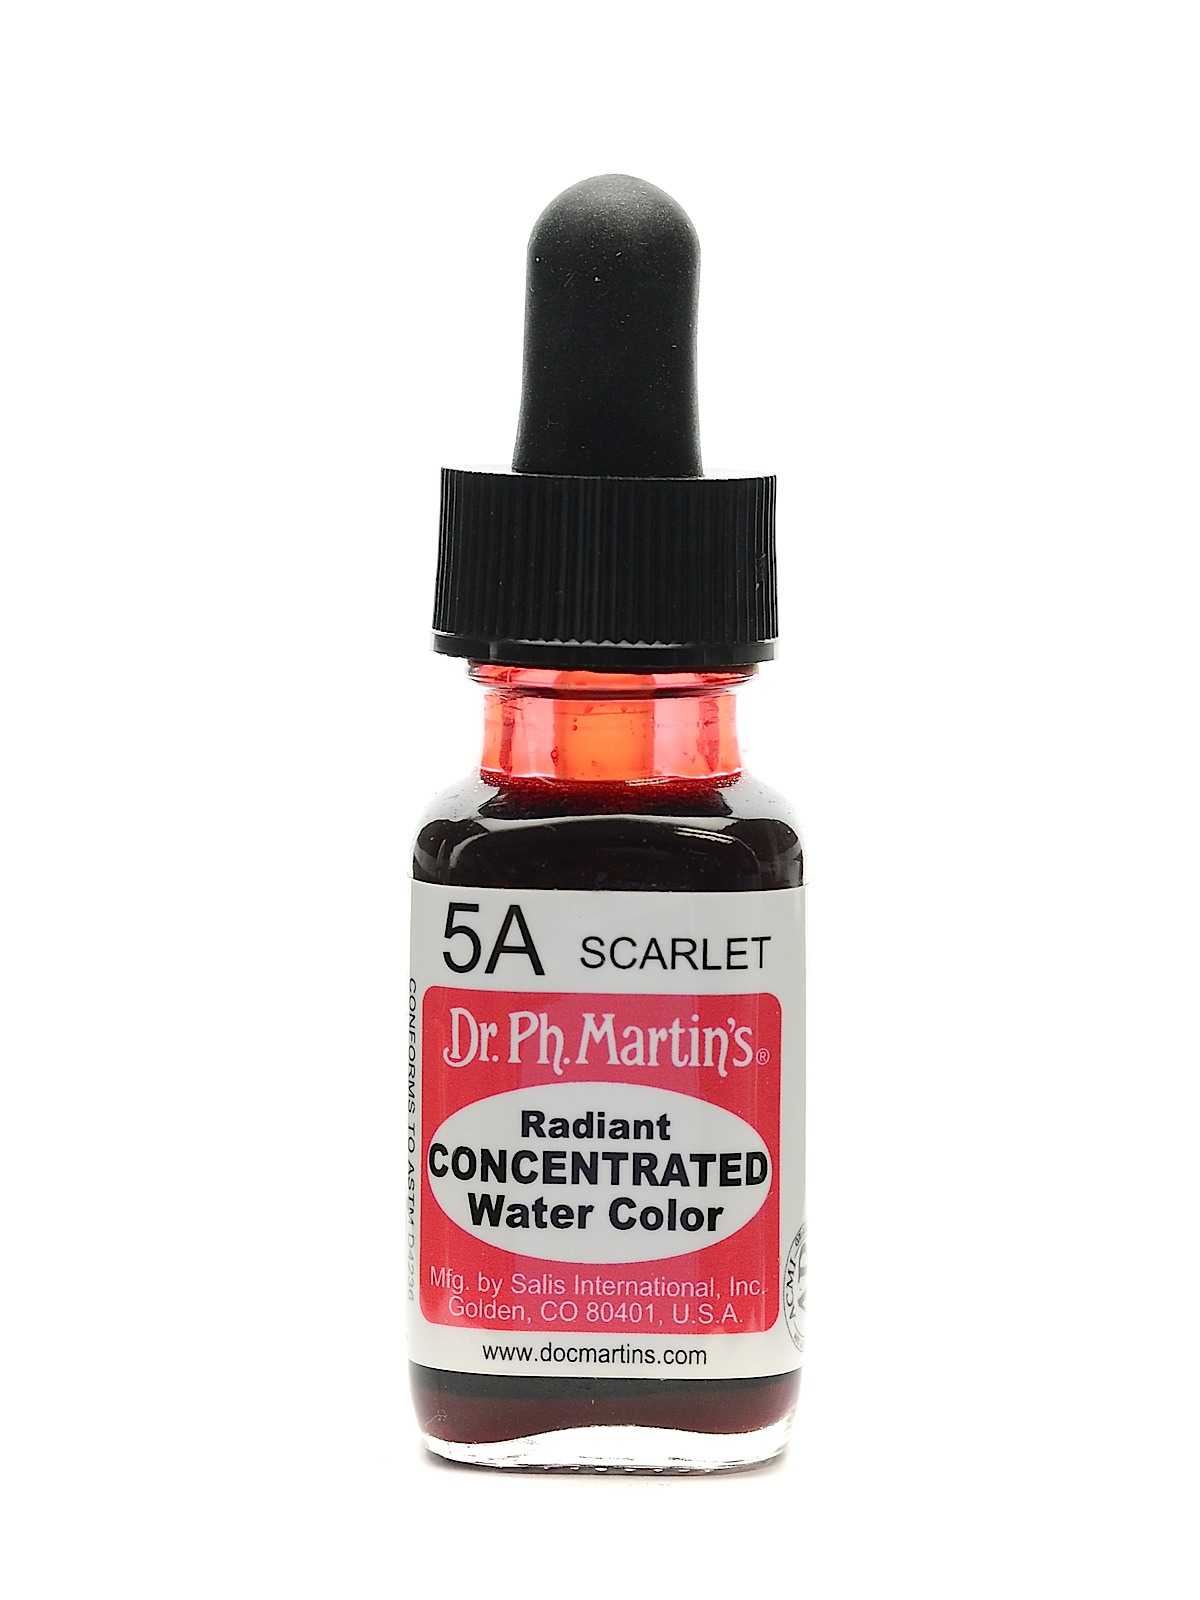 Radiant Concentrated Watercolors Scarlet 1 2 Oz.